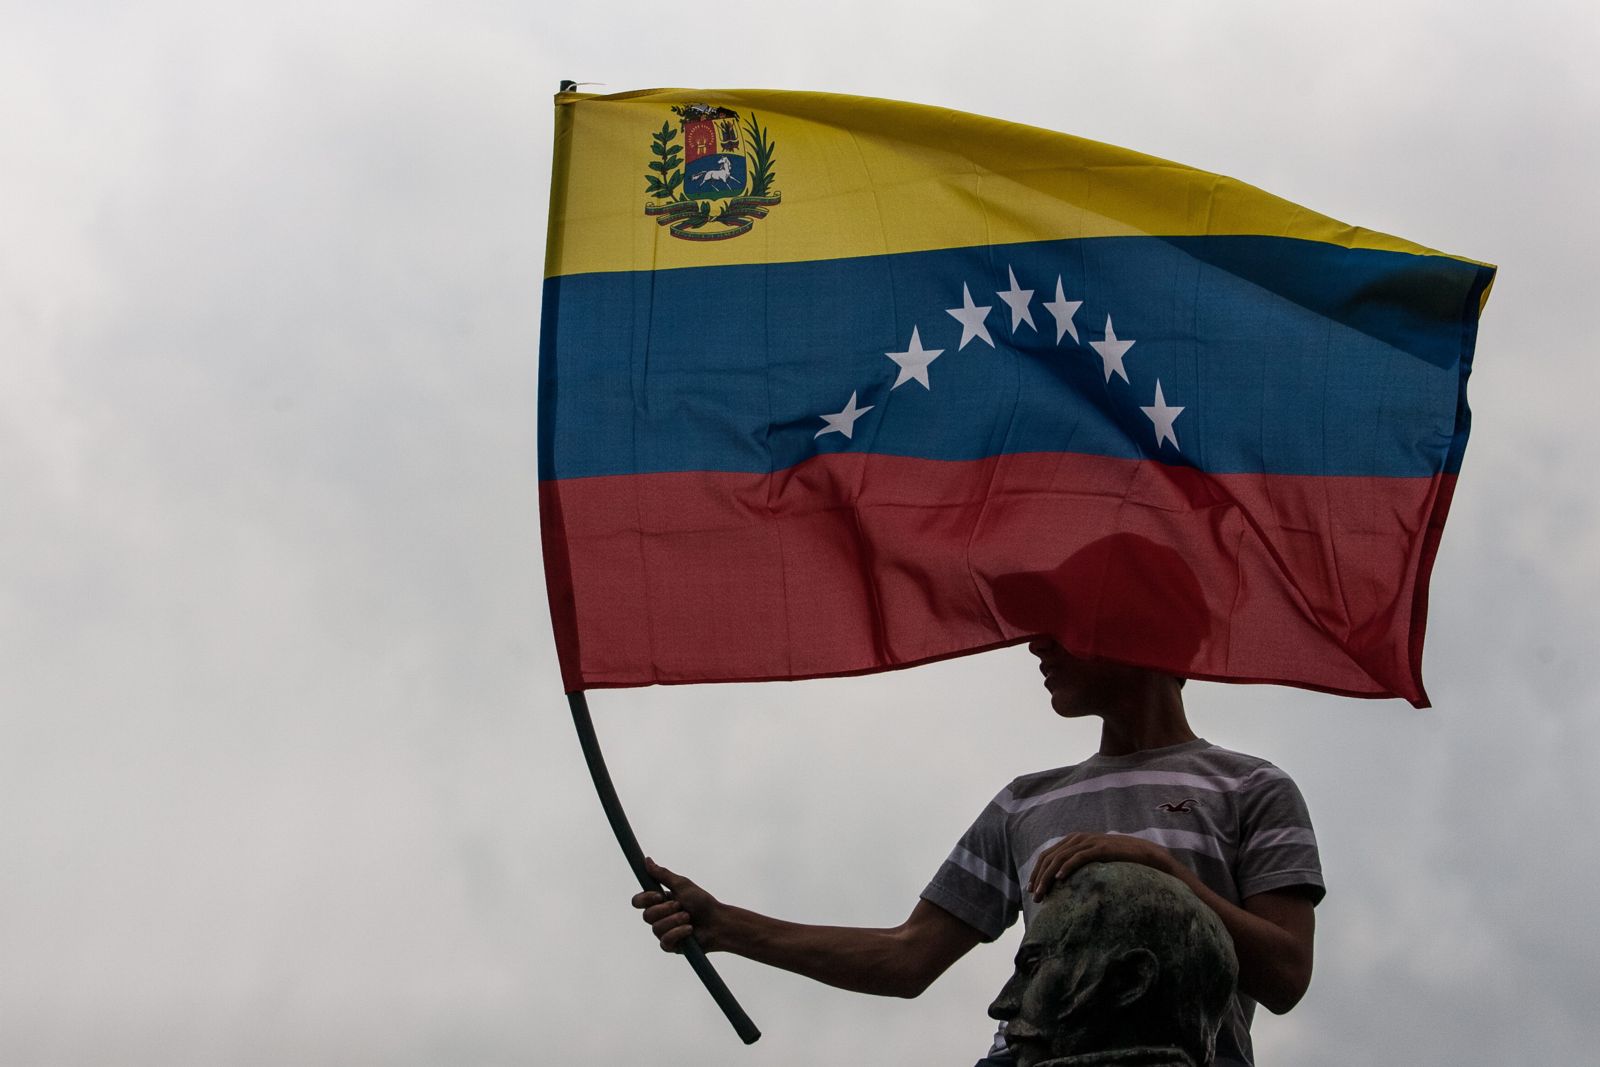 Resilience in non-democratic contexts: Perspectives from Venezuela